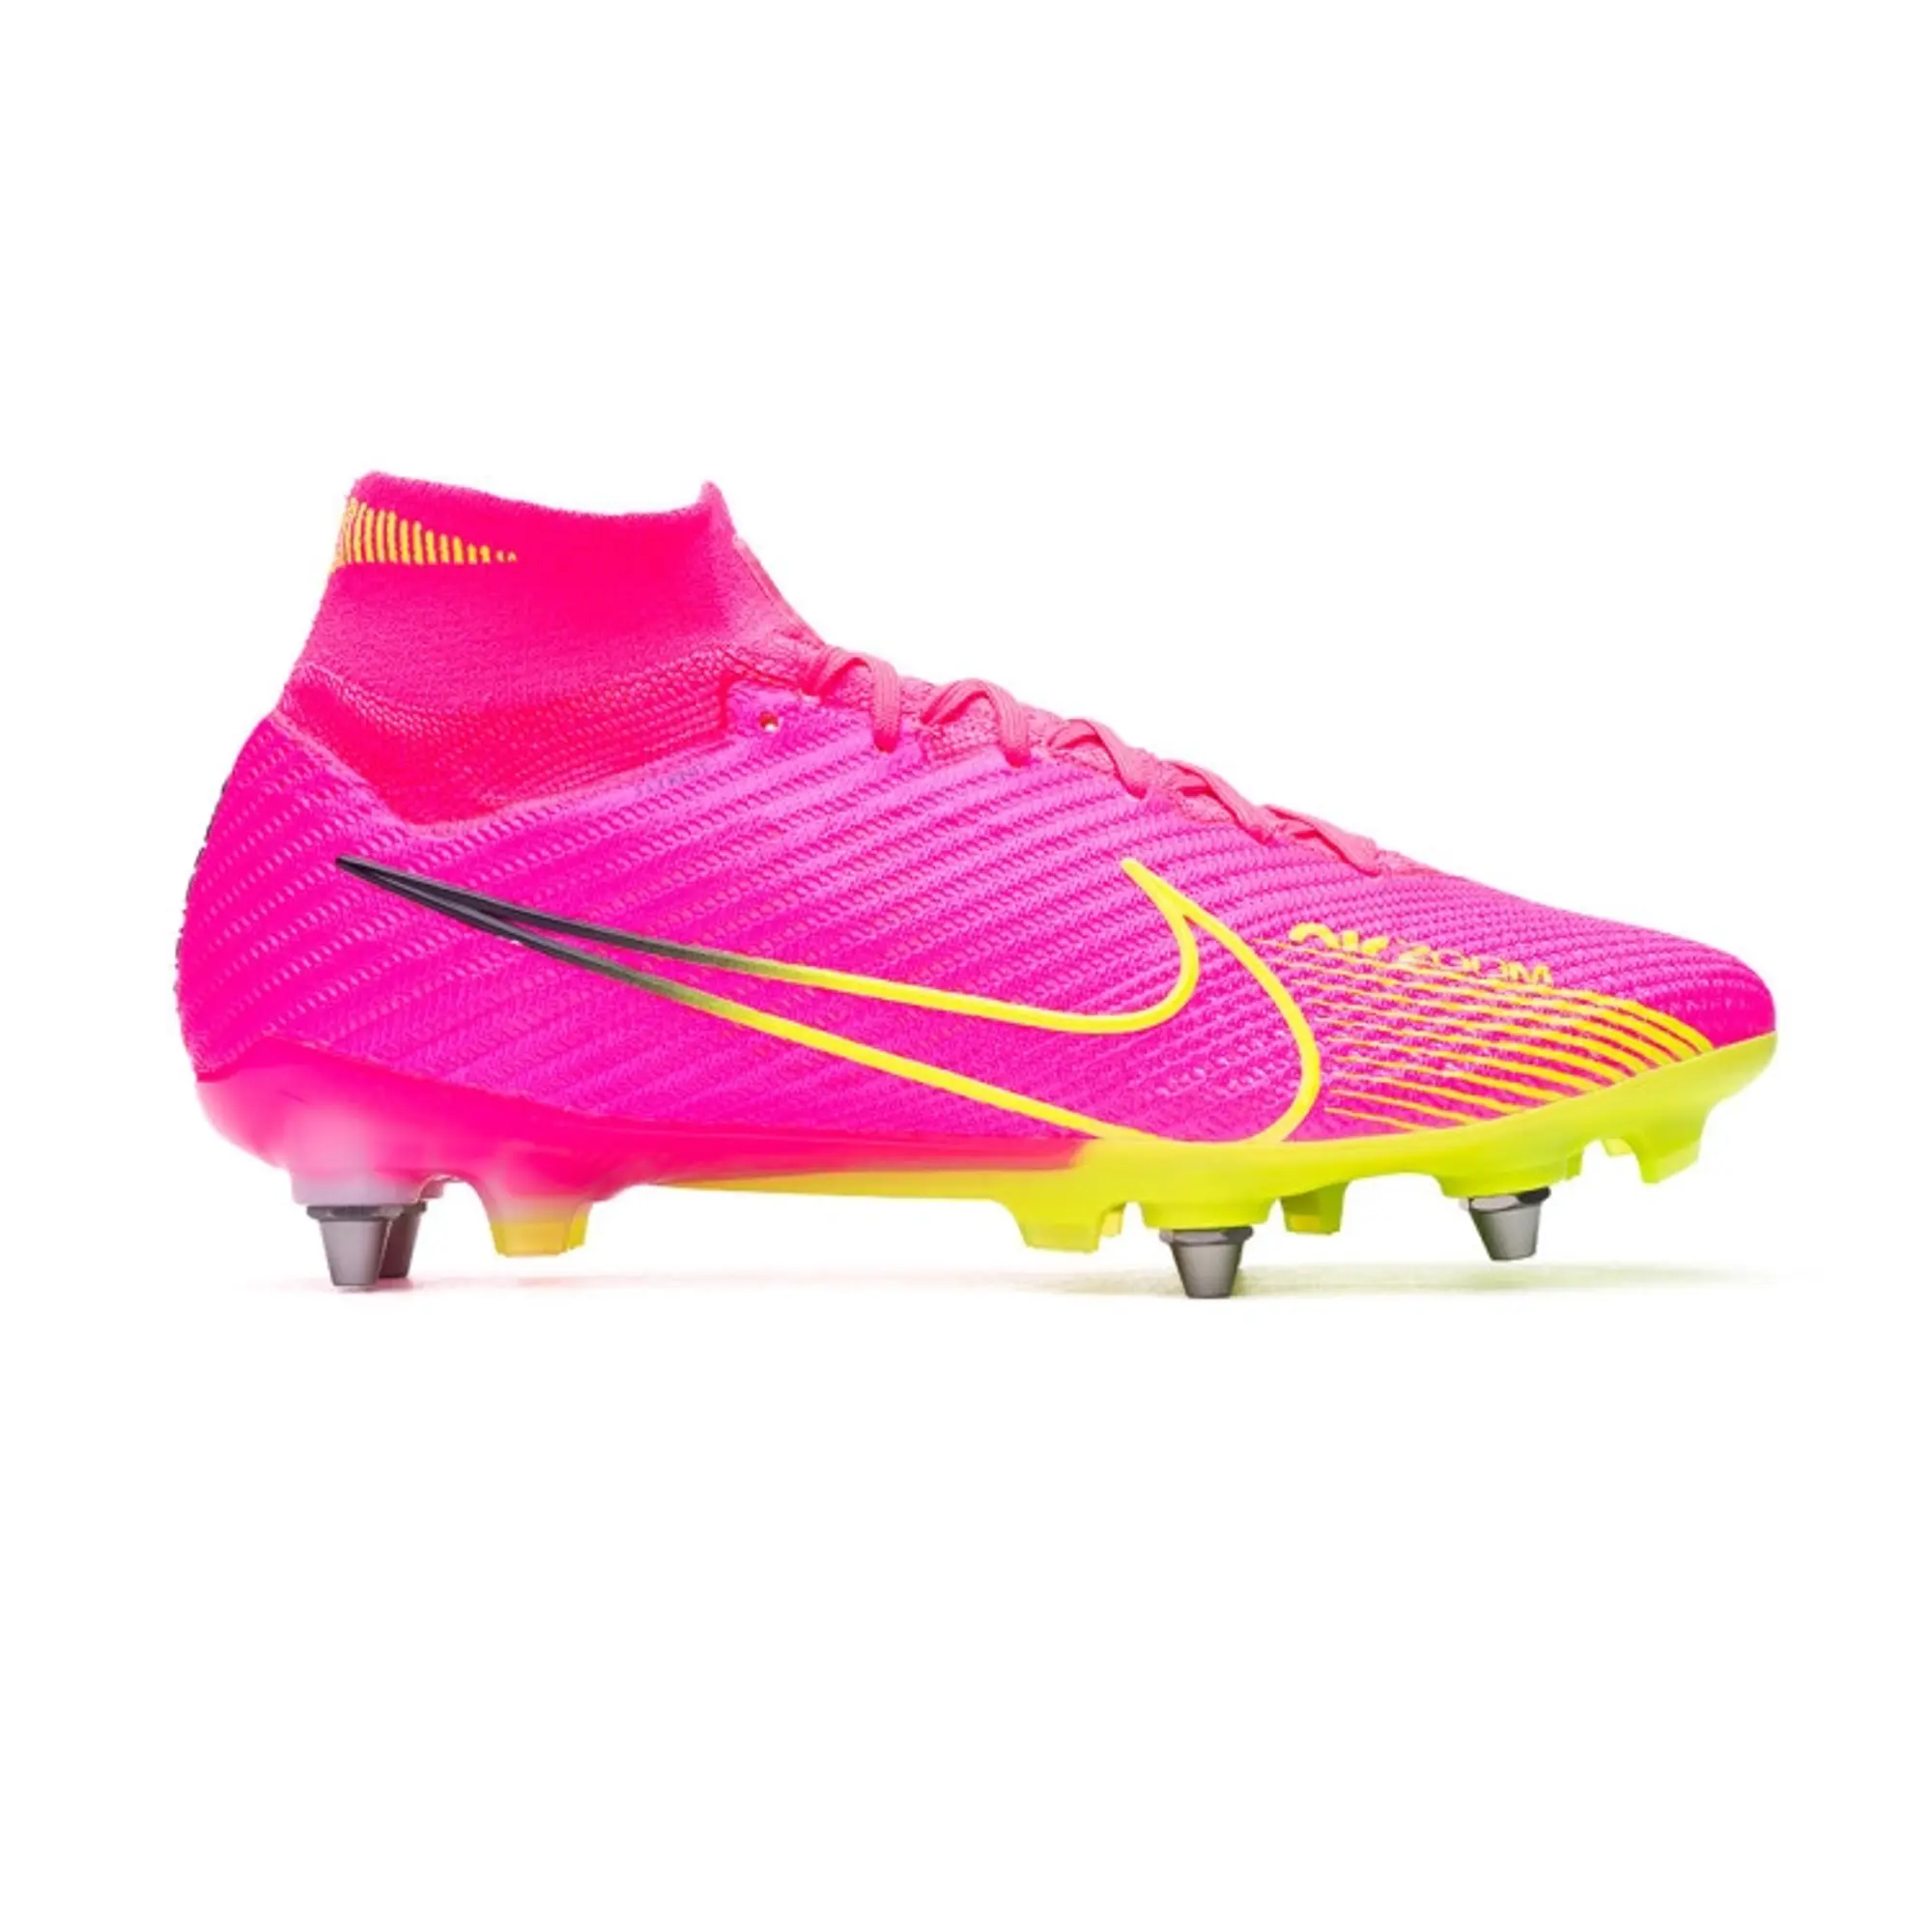 Nike Air Zoom Mercurial Superfly Elite 9 Sg-Pro Player Edition Luminous - Pink